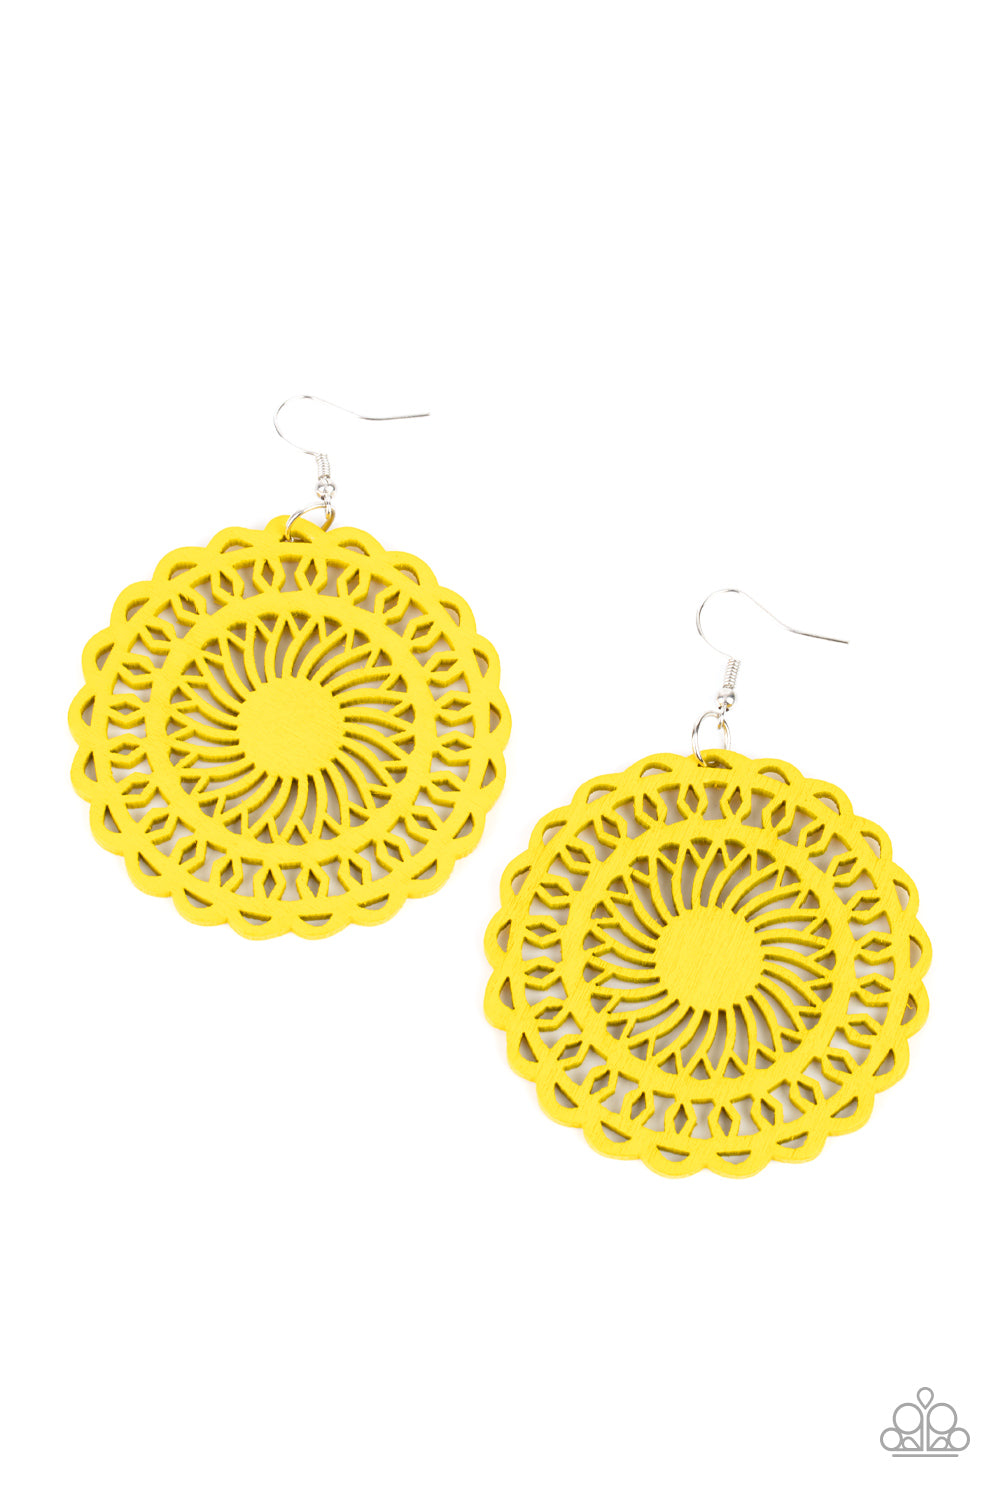 Island Sun Yellow Wooden Earring - Paparazzi Accessories  Painted in a sunny yellow finish, a stenciled wooden frame is cutout into a radiating sunburst frame for a colorfully tropic look. Earring attaches to a standard fishhook fitting.  All Paparazzi Accessories are lead free and nickel free!   Sold as one pair of earrings.